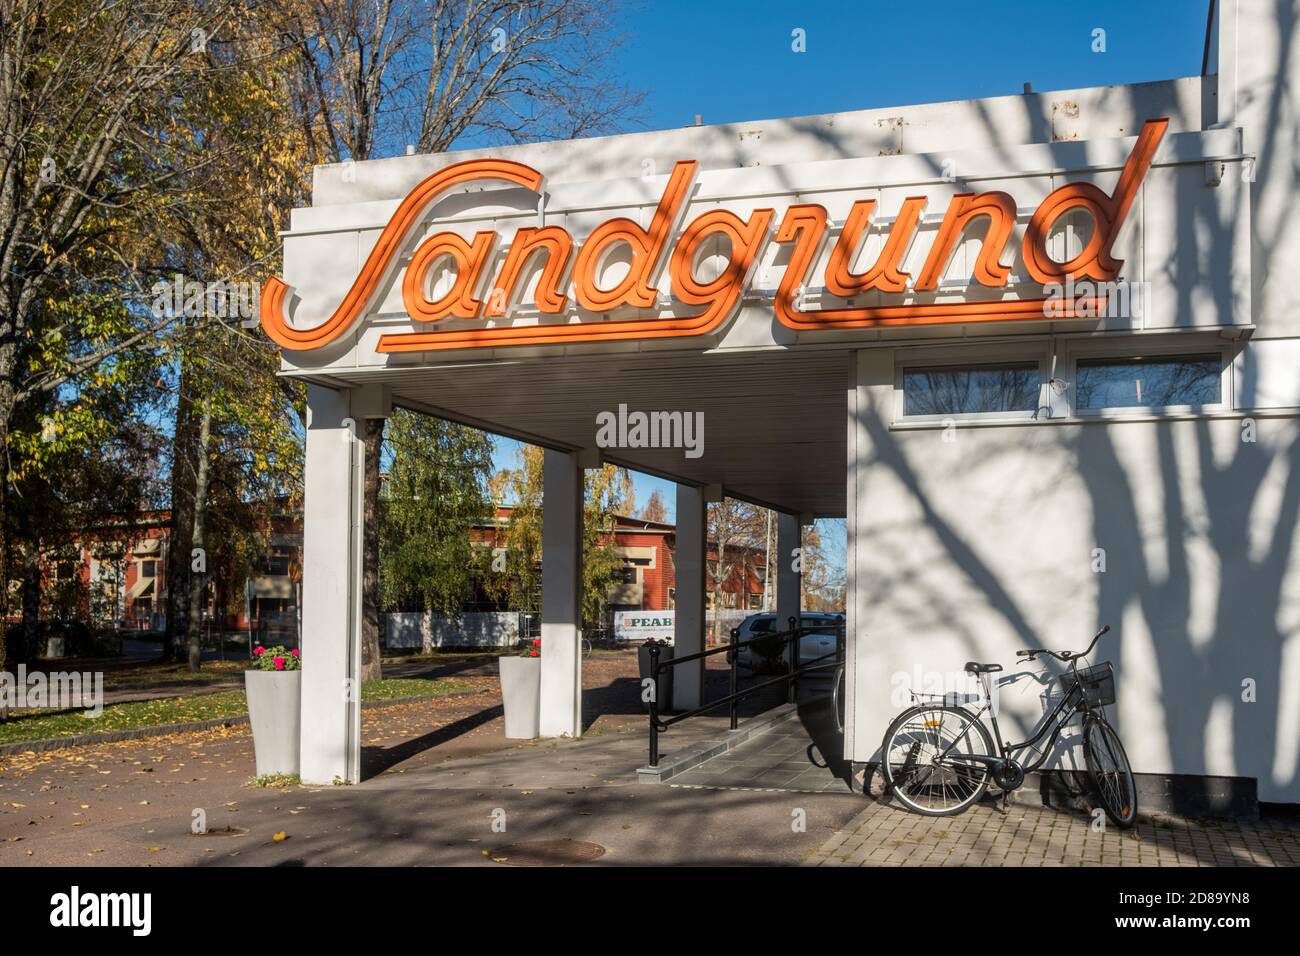 Sandgrund is a former dance restaurant that has been redevolped to an art museum displaying art by famous Swedish painter Lars Lerin. Stock Photo